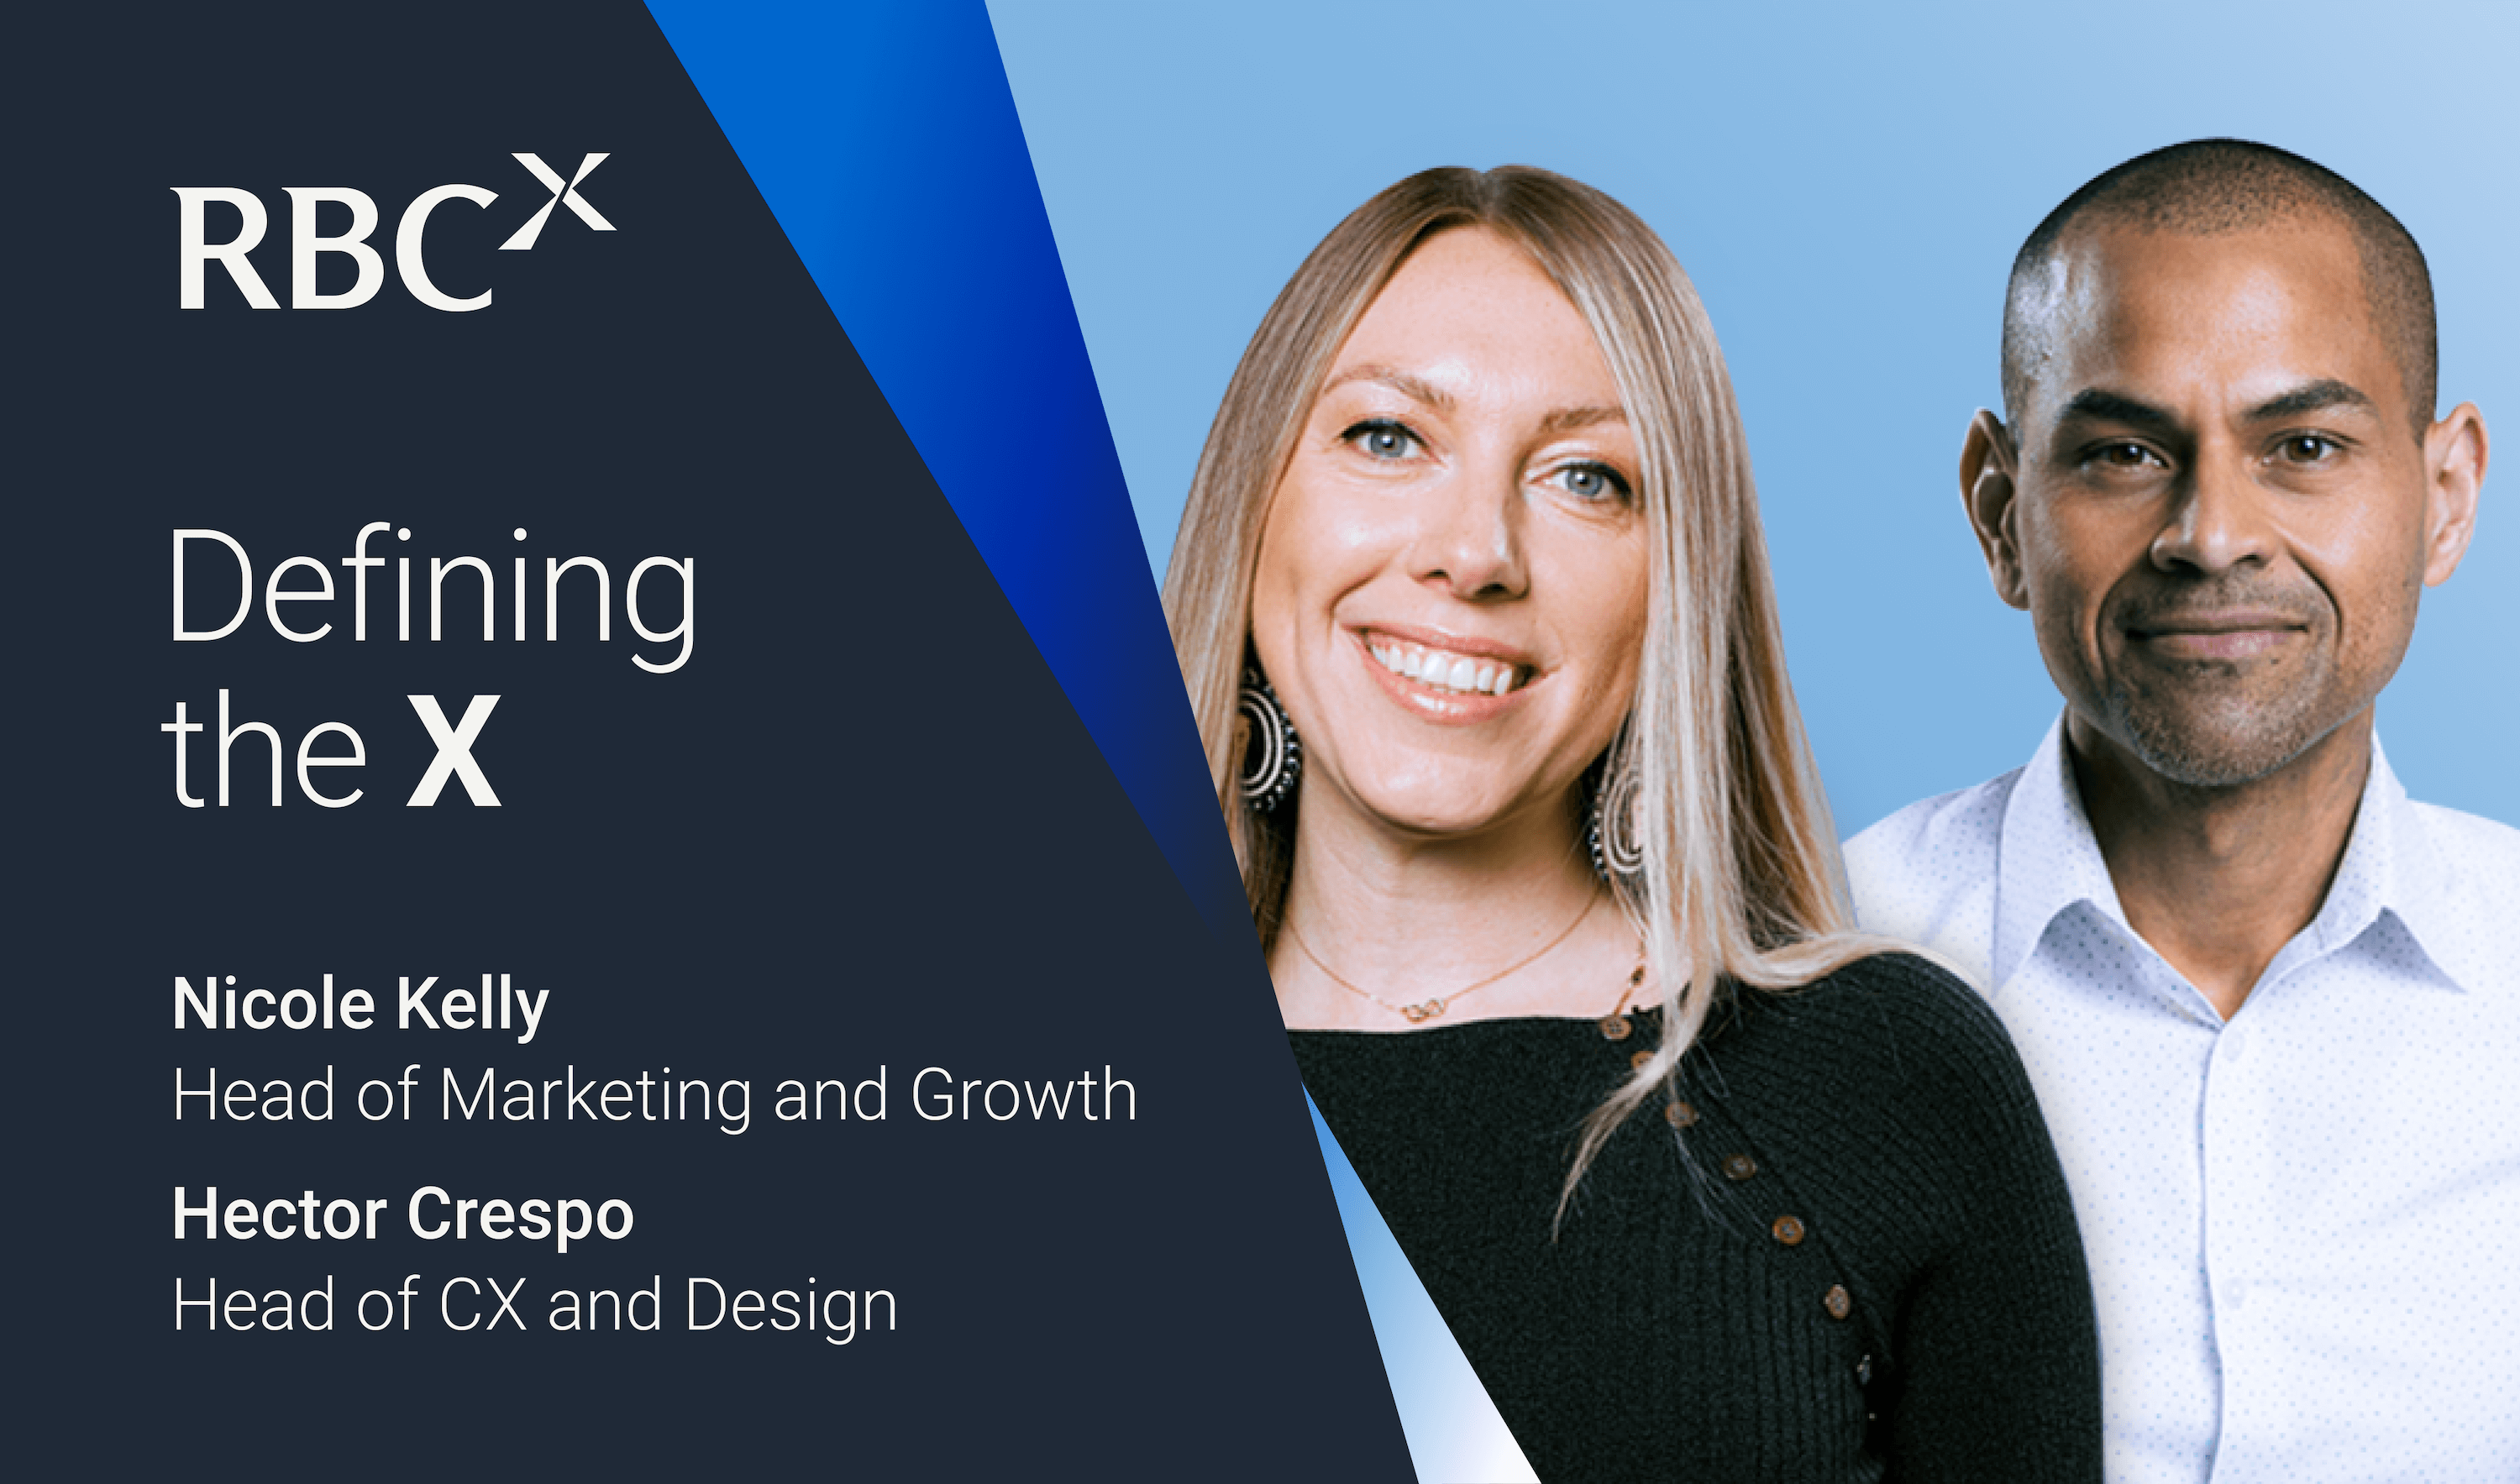 Defining the X - The Design Journey Behind RBCx